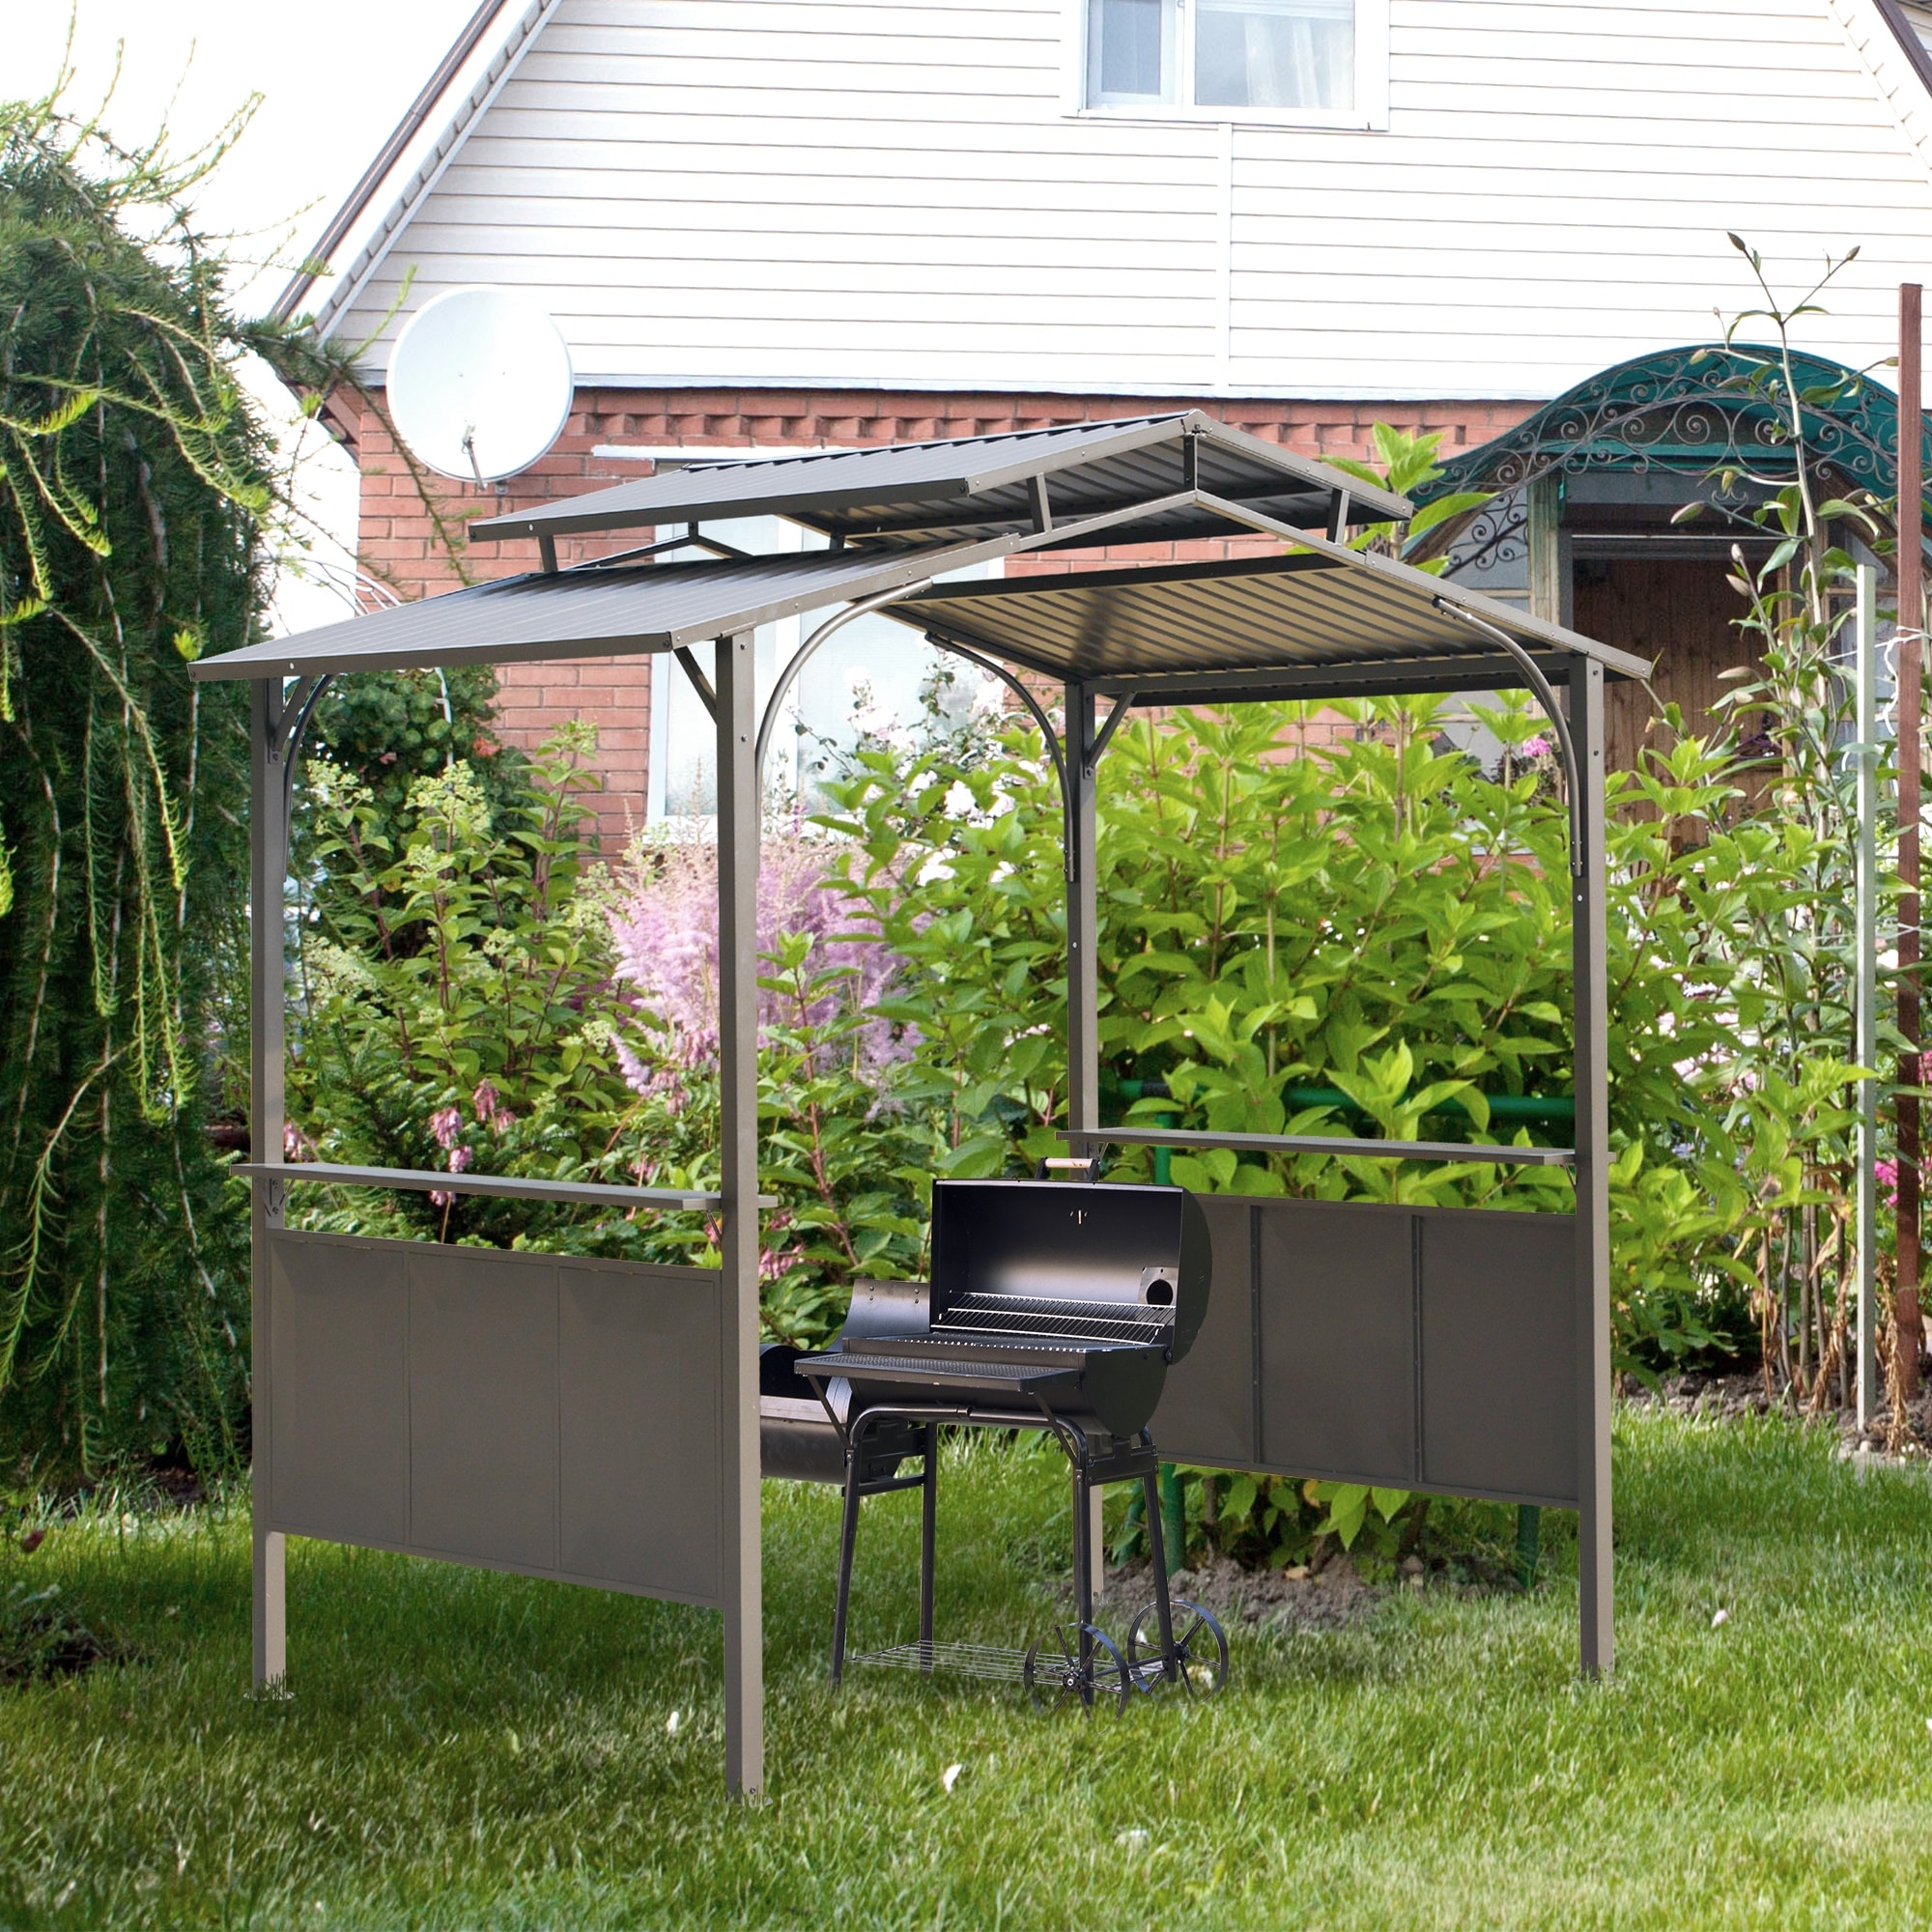 Warmally 8'x5' Grill Gazebo BBQ Patio Shelter Canopy for Outdoor Barbecue Tent Available at Night Dark Grey 